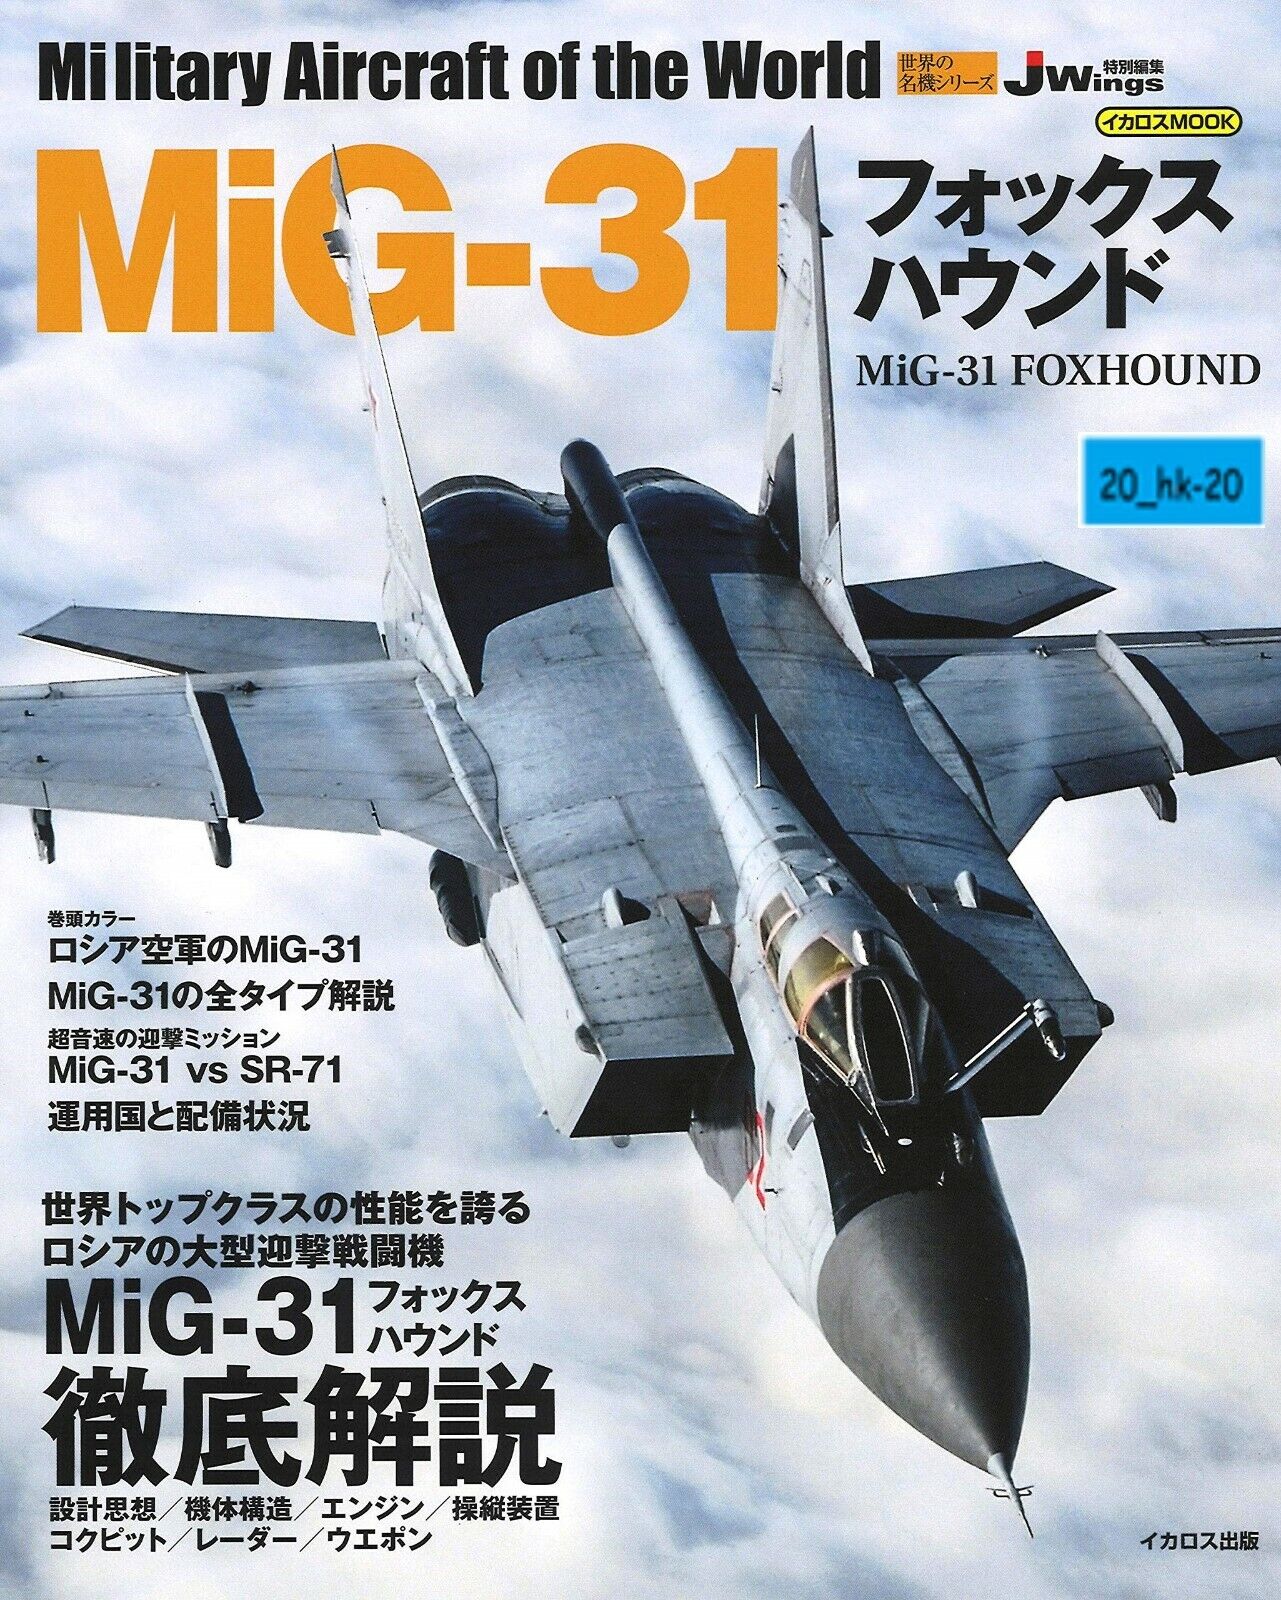 MiG-31 FOXHOUND Japanese book Military Aircraft of the world SR-71